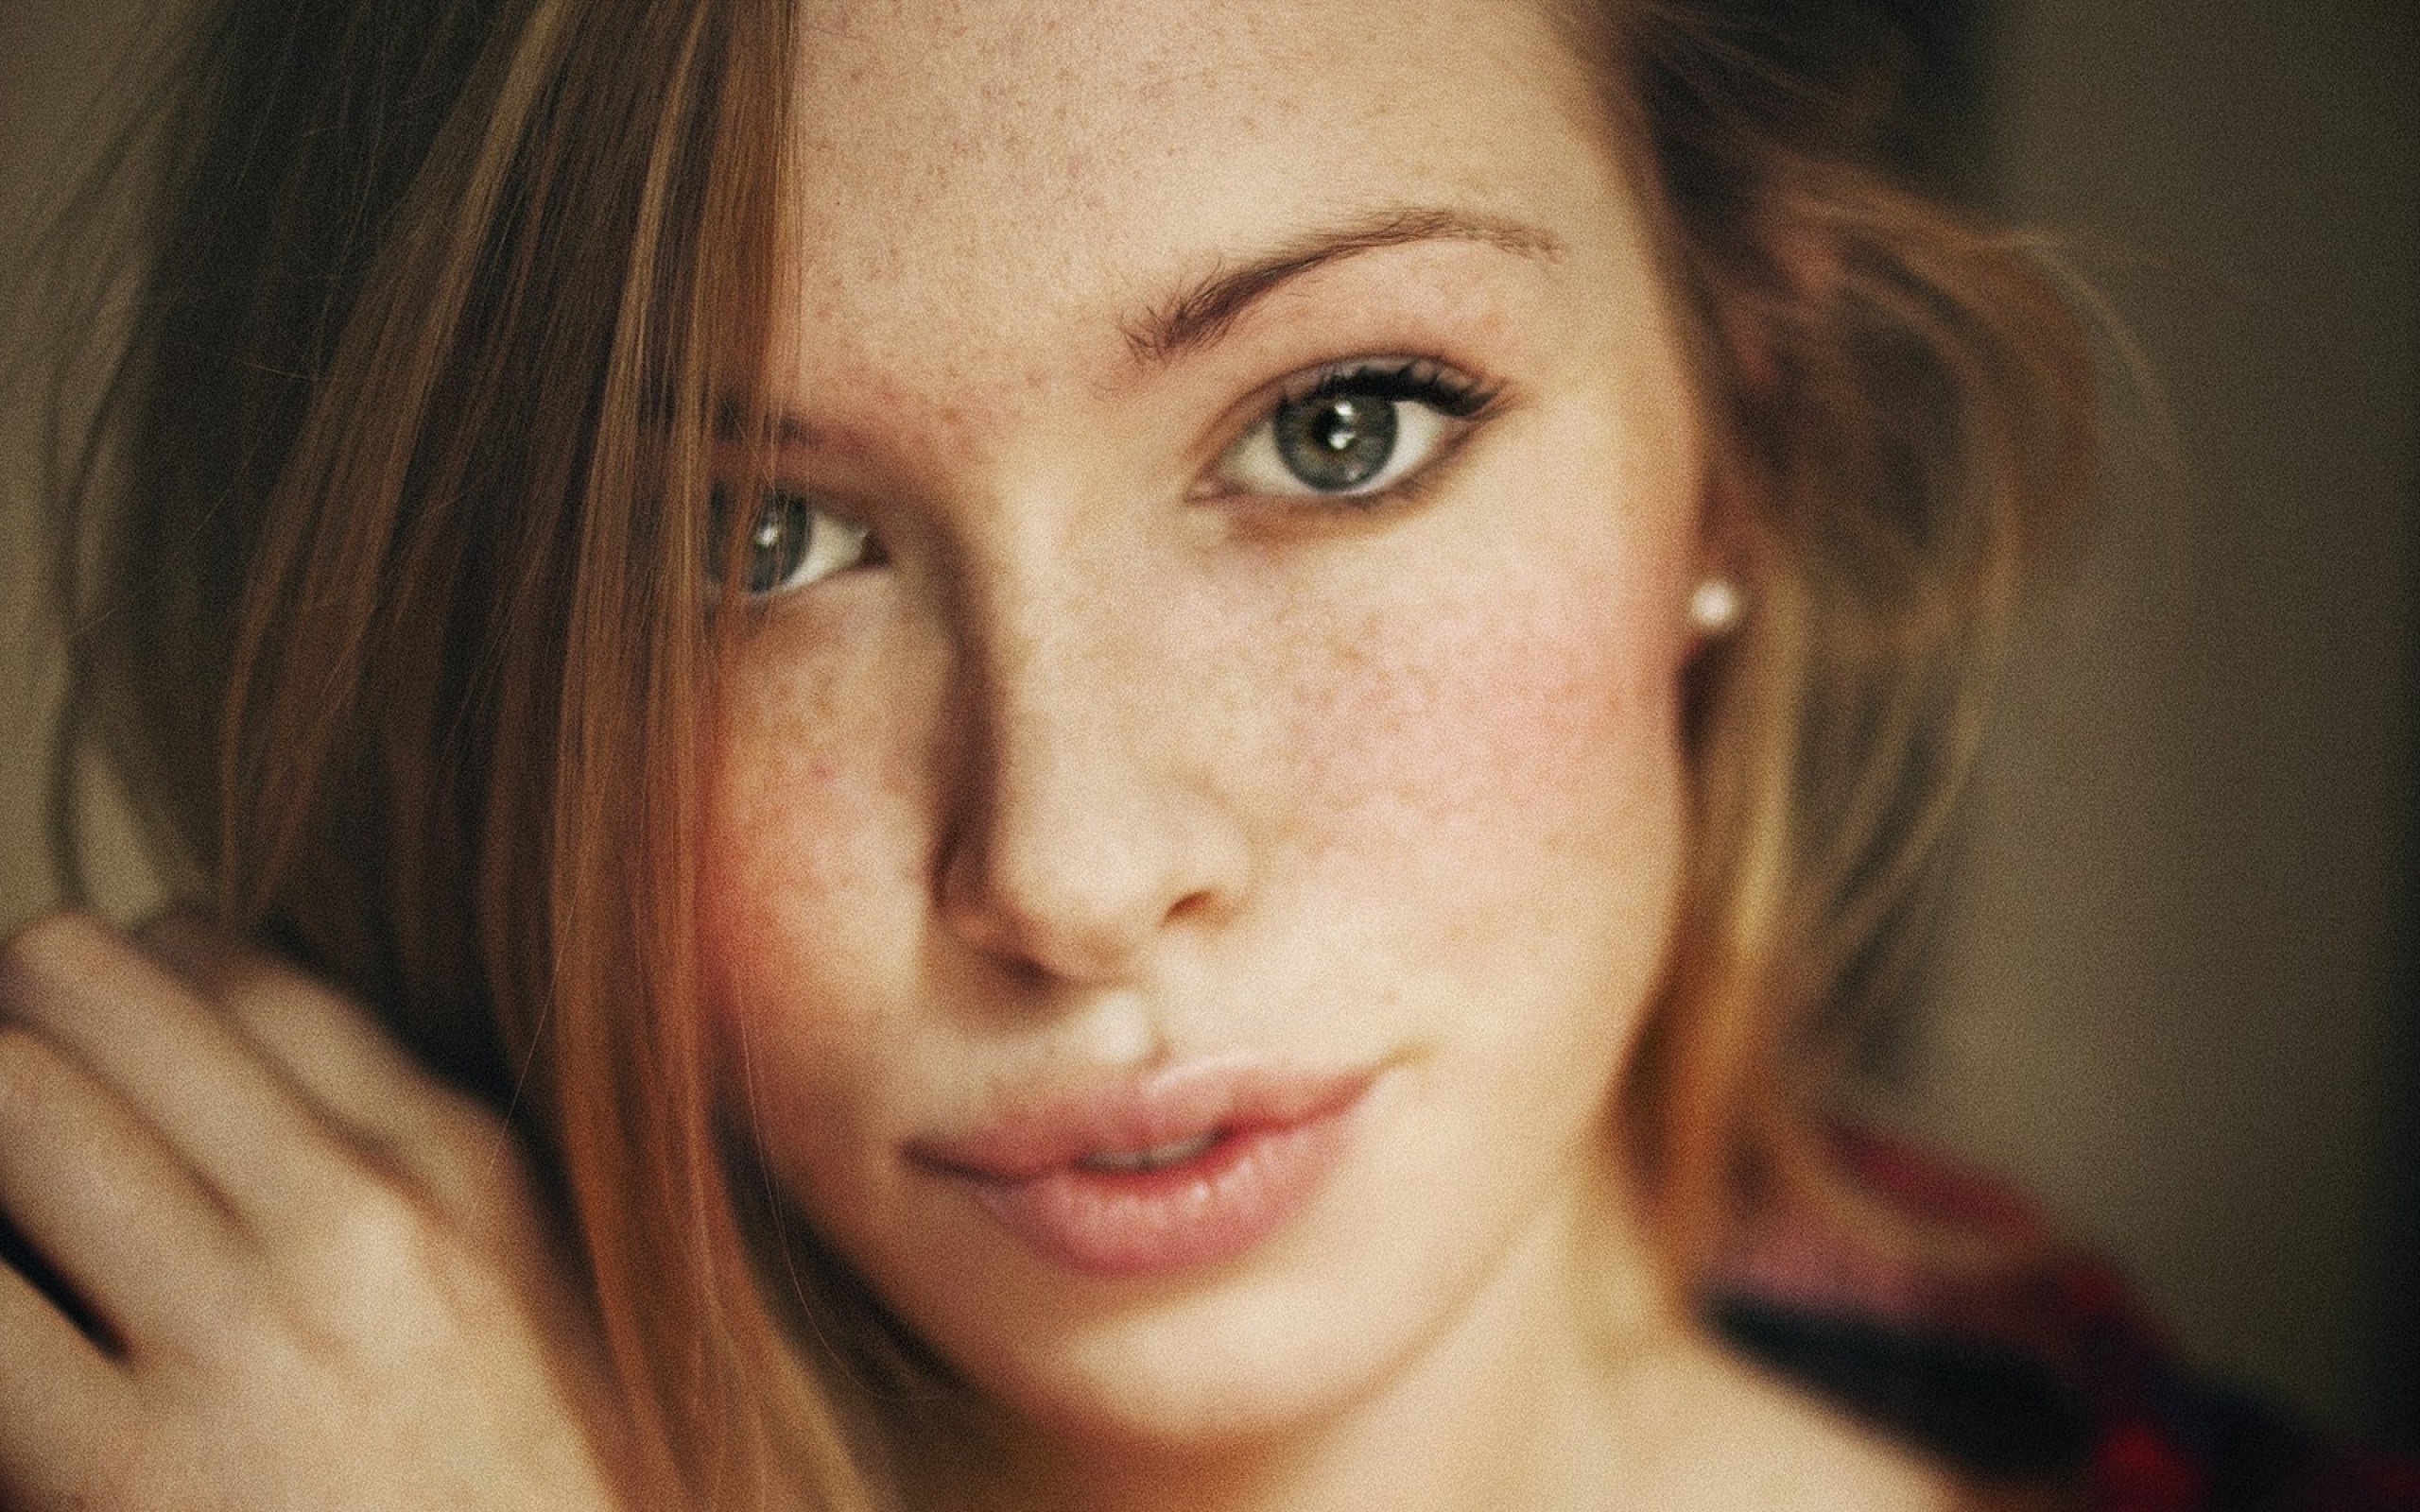 2560x1600 Image: Portrait of a Pretty Face wallpapers and stock photos. Â«